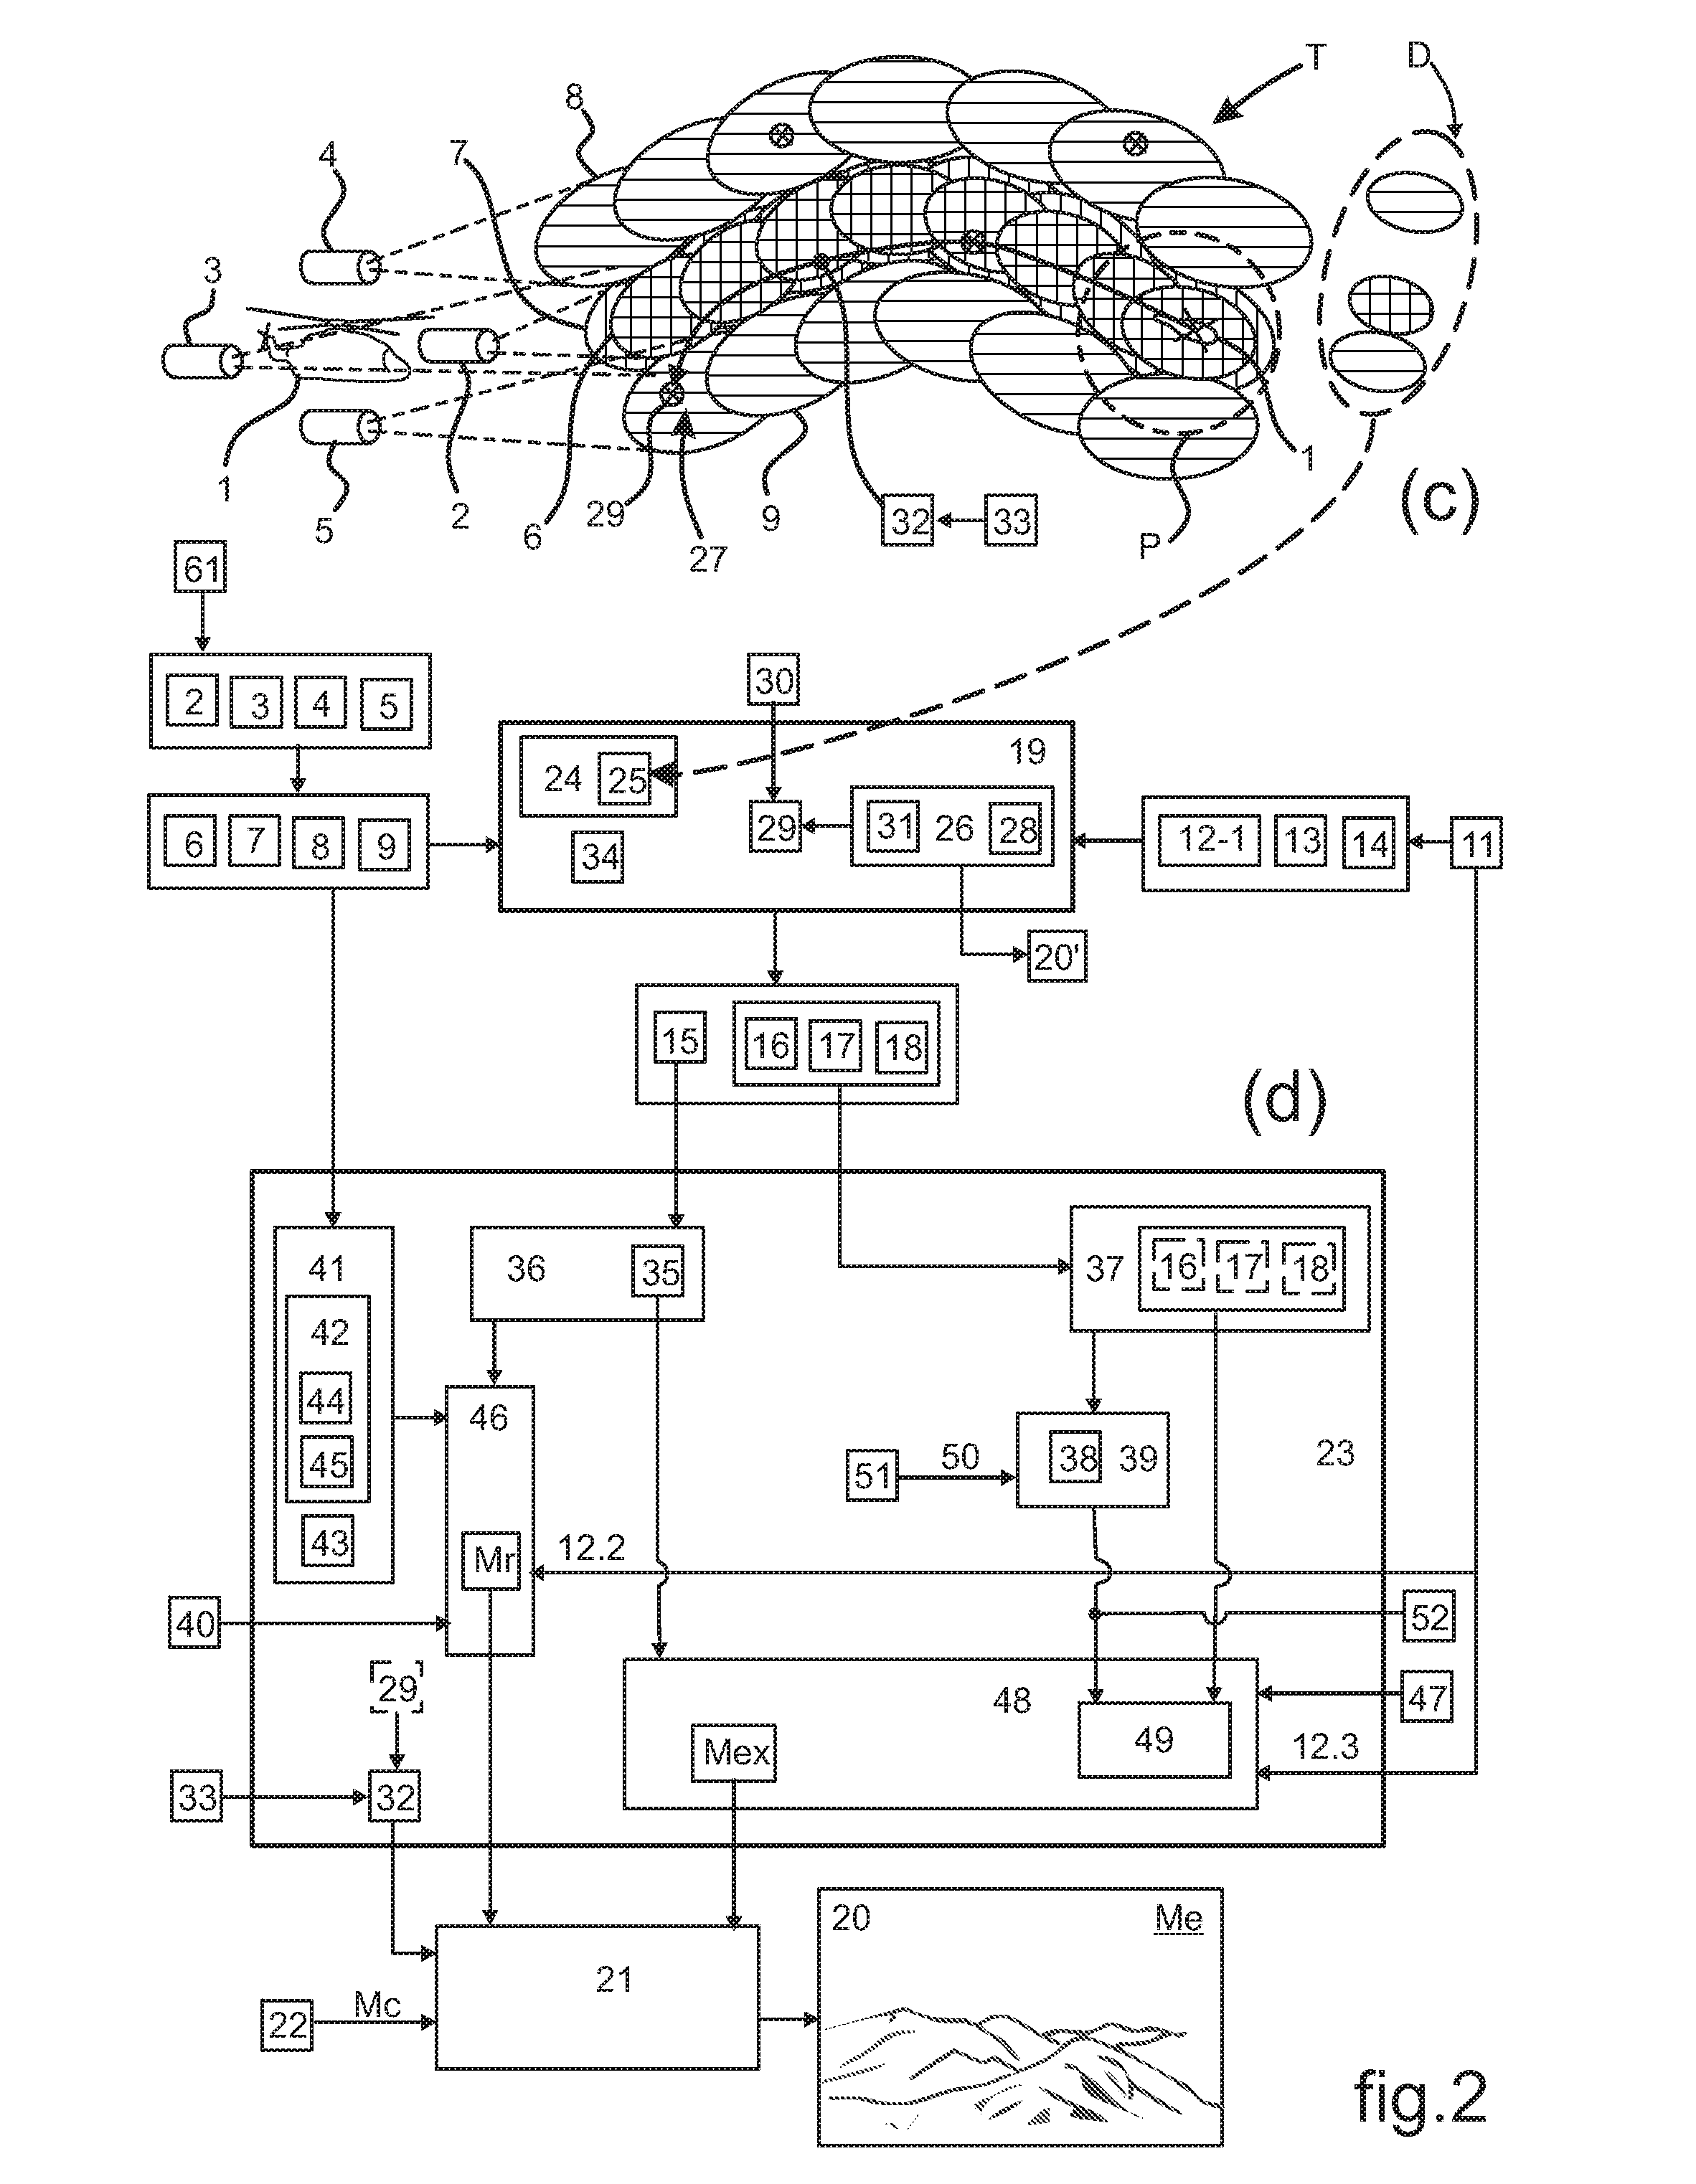 Method of assisting in the navigation of a rotorcraft by dynamically displaying a representation of the outside world constructed in flight in instantaneous and/or deferred manner